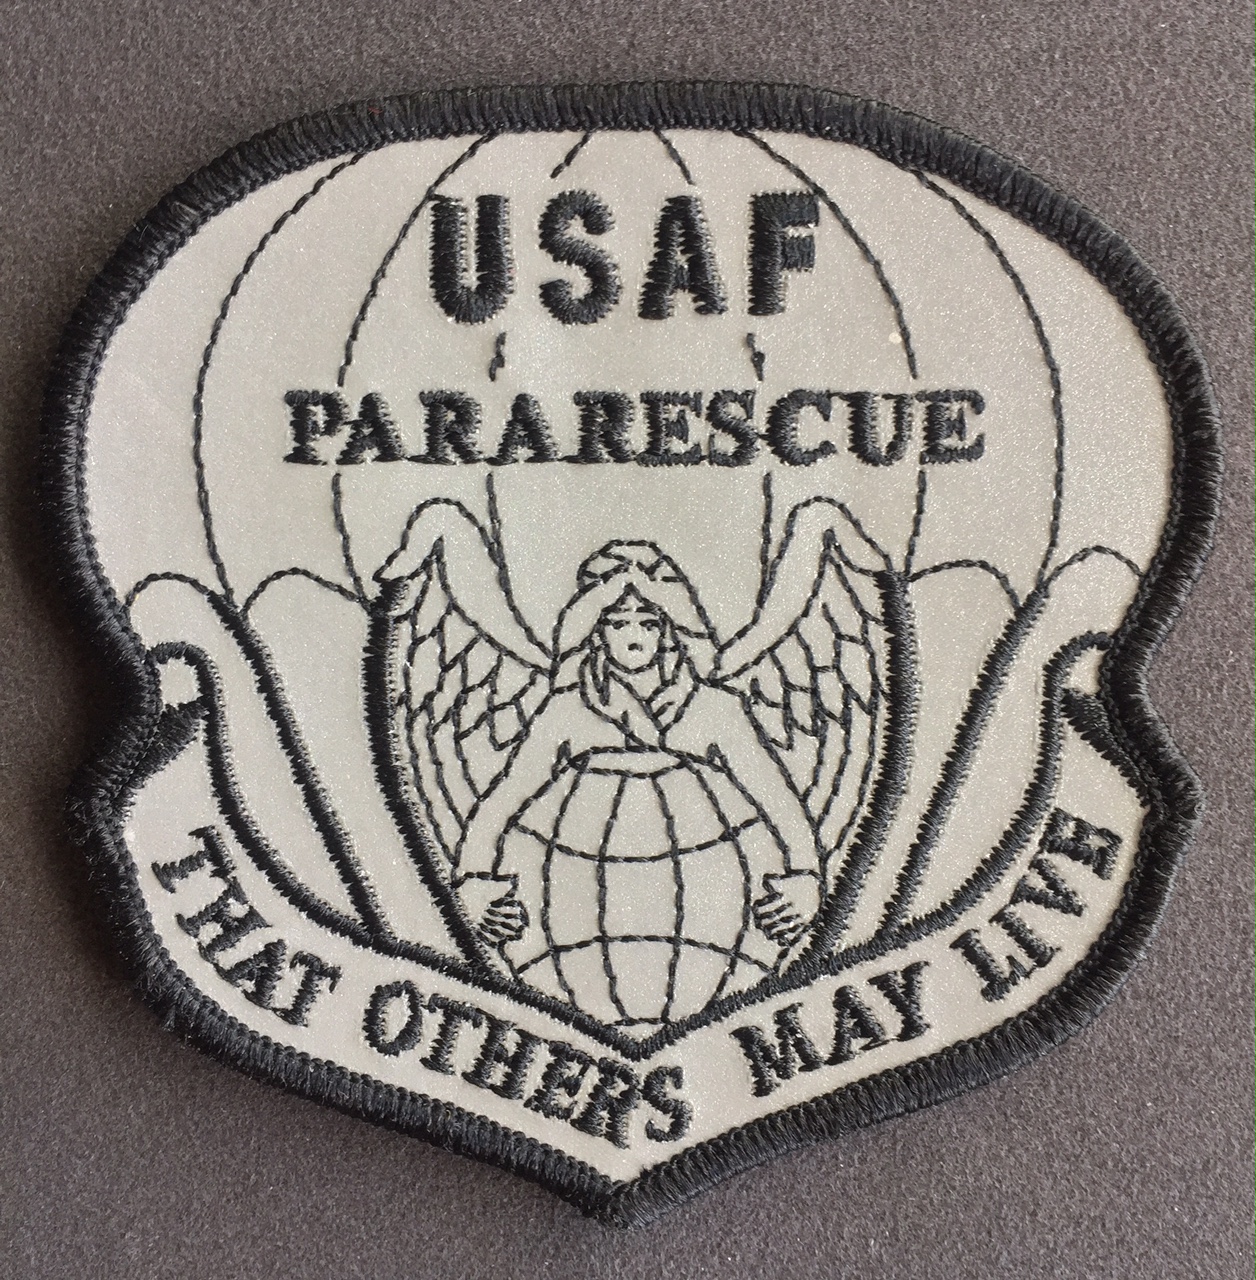 THE USAF RESCUE COLLECTION USAF Pararescue / Guardian Angel Reflective